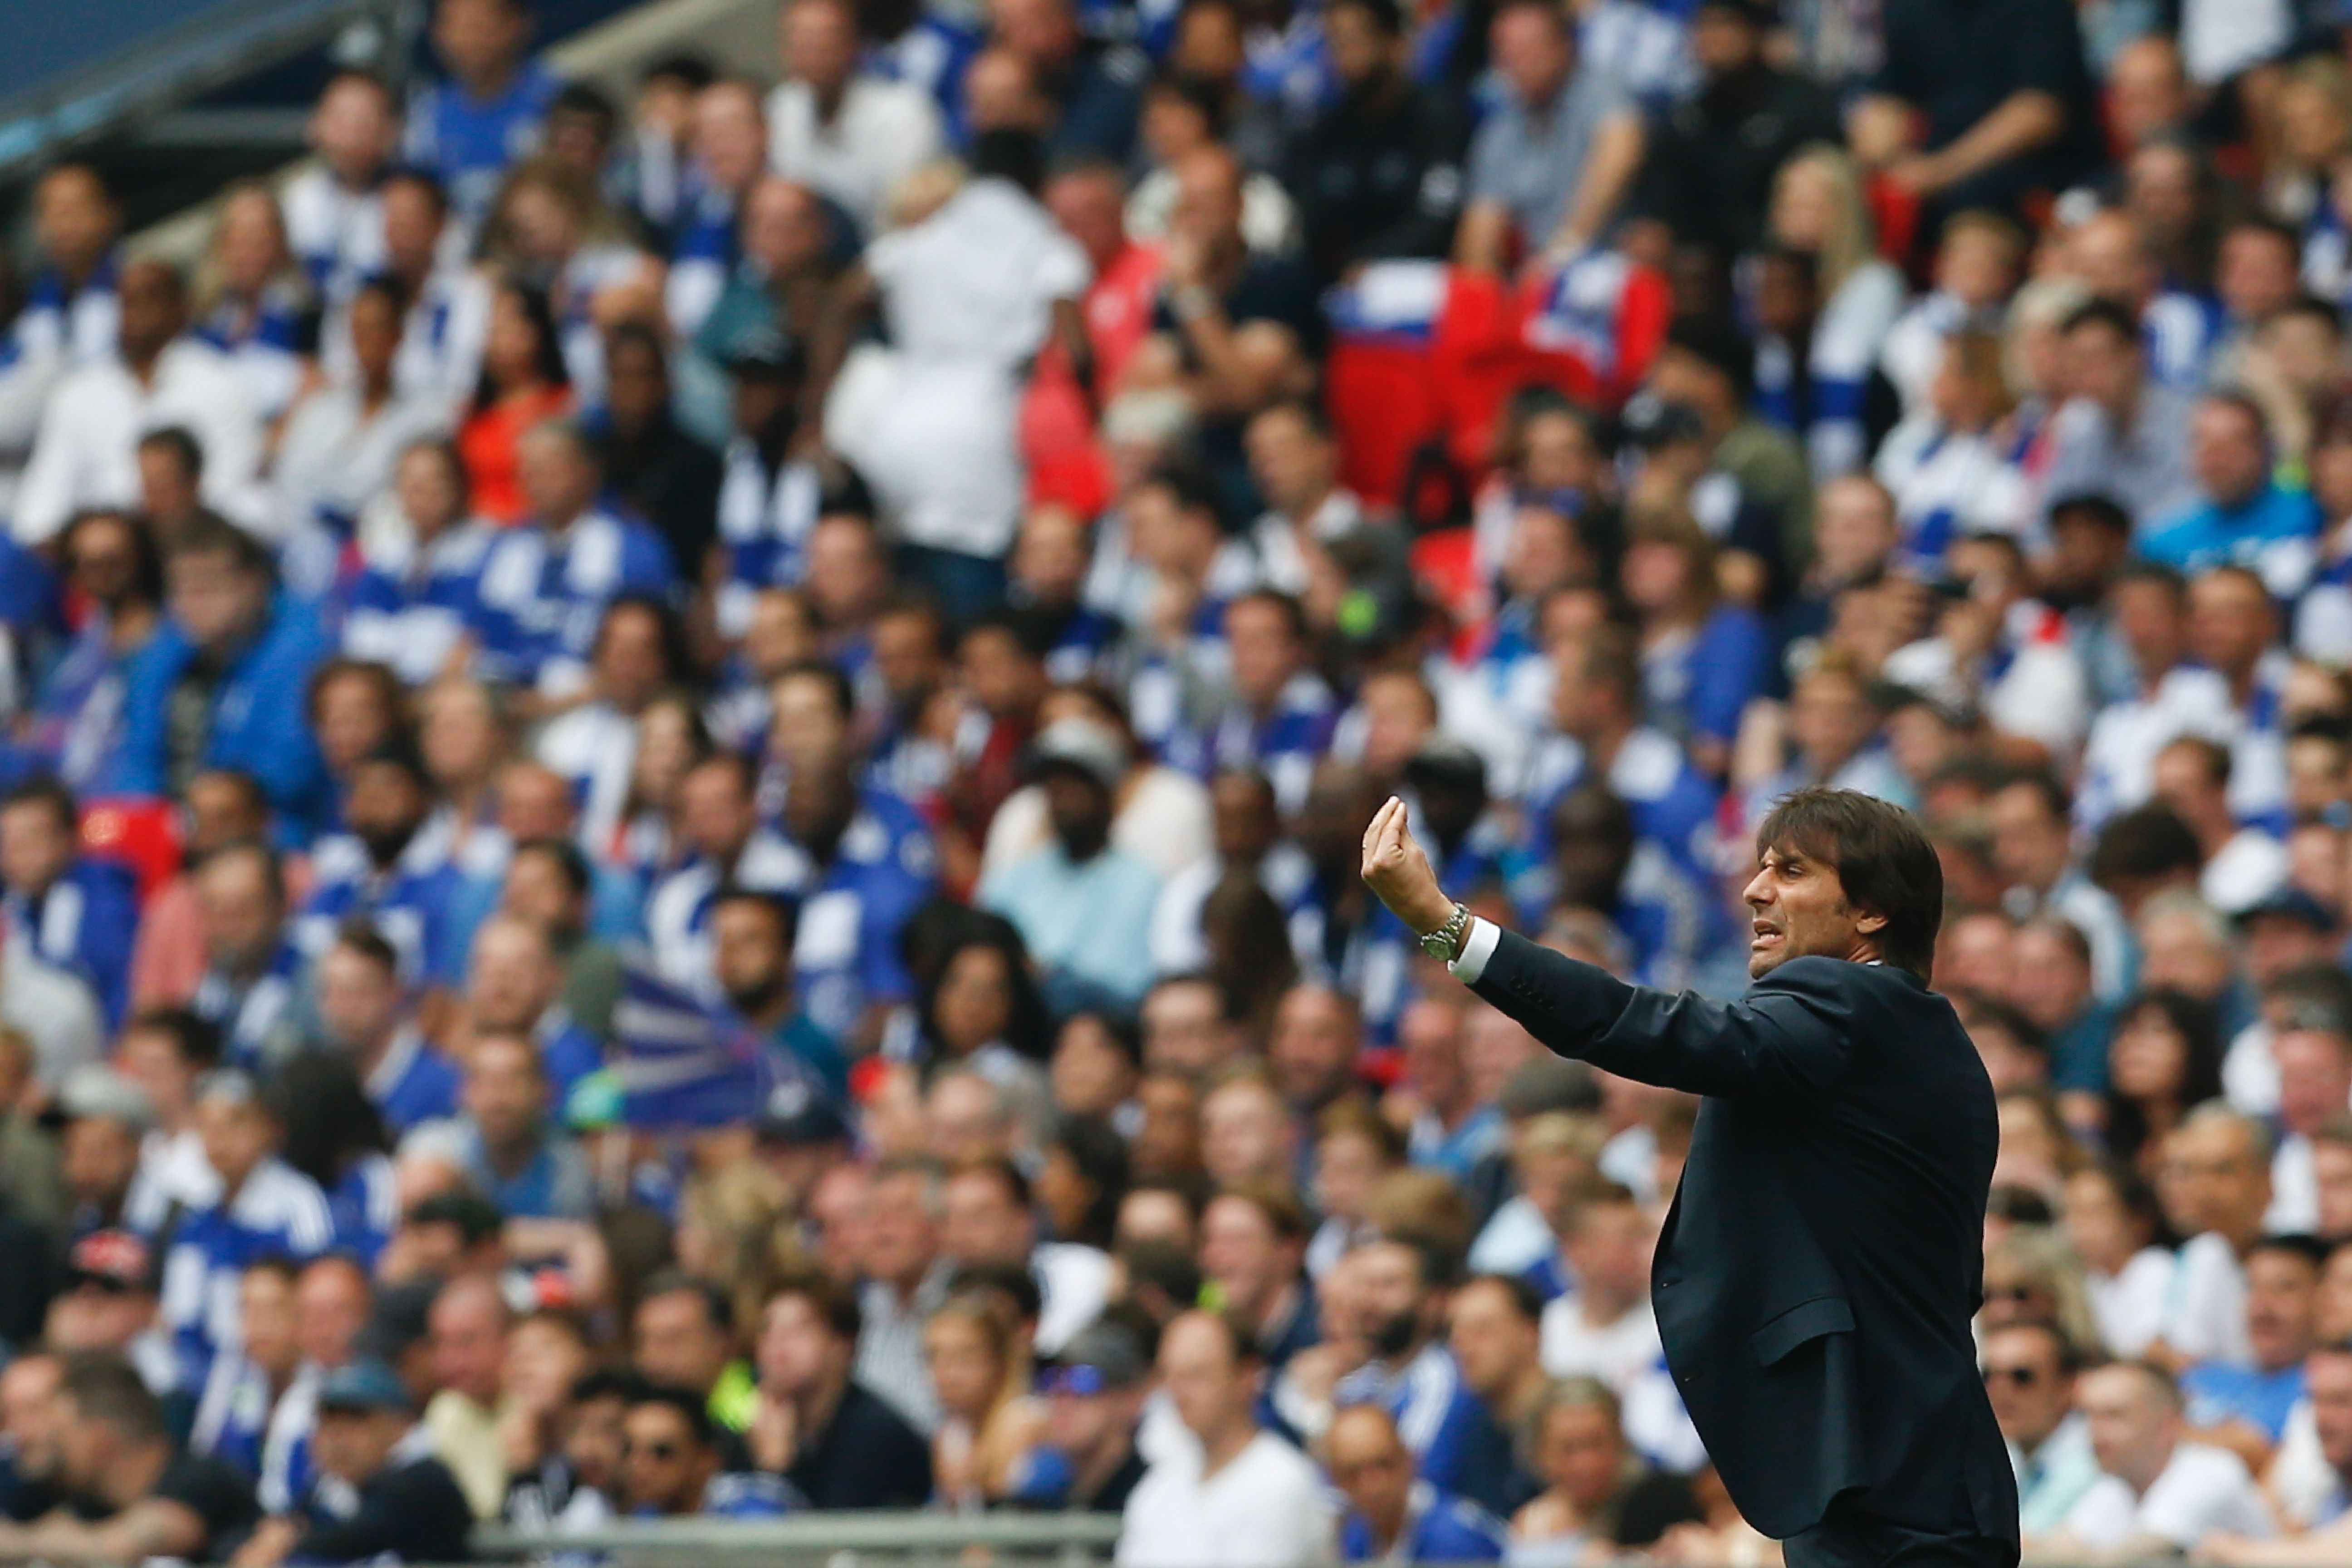 Chelsea's Italian head coach Antonio Conte gestures on the touchline during the English FA Cup final football match between Arsenal and Chelsea at Wembley stadium in London on May 27, 2017. / AFP PHOTO / Ian KINGTON / NOT FOR MARKETING OR ADVERTISING USE / RESTRICTED TO EDITORIAL USE        (Photo credit should read IAN KINGTON/AFP/Getty Images)